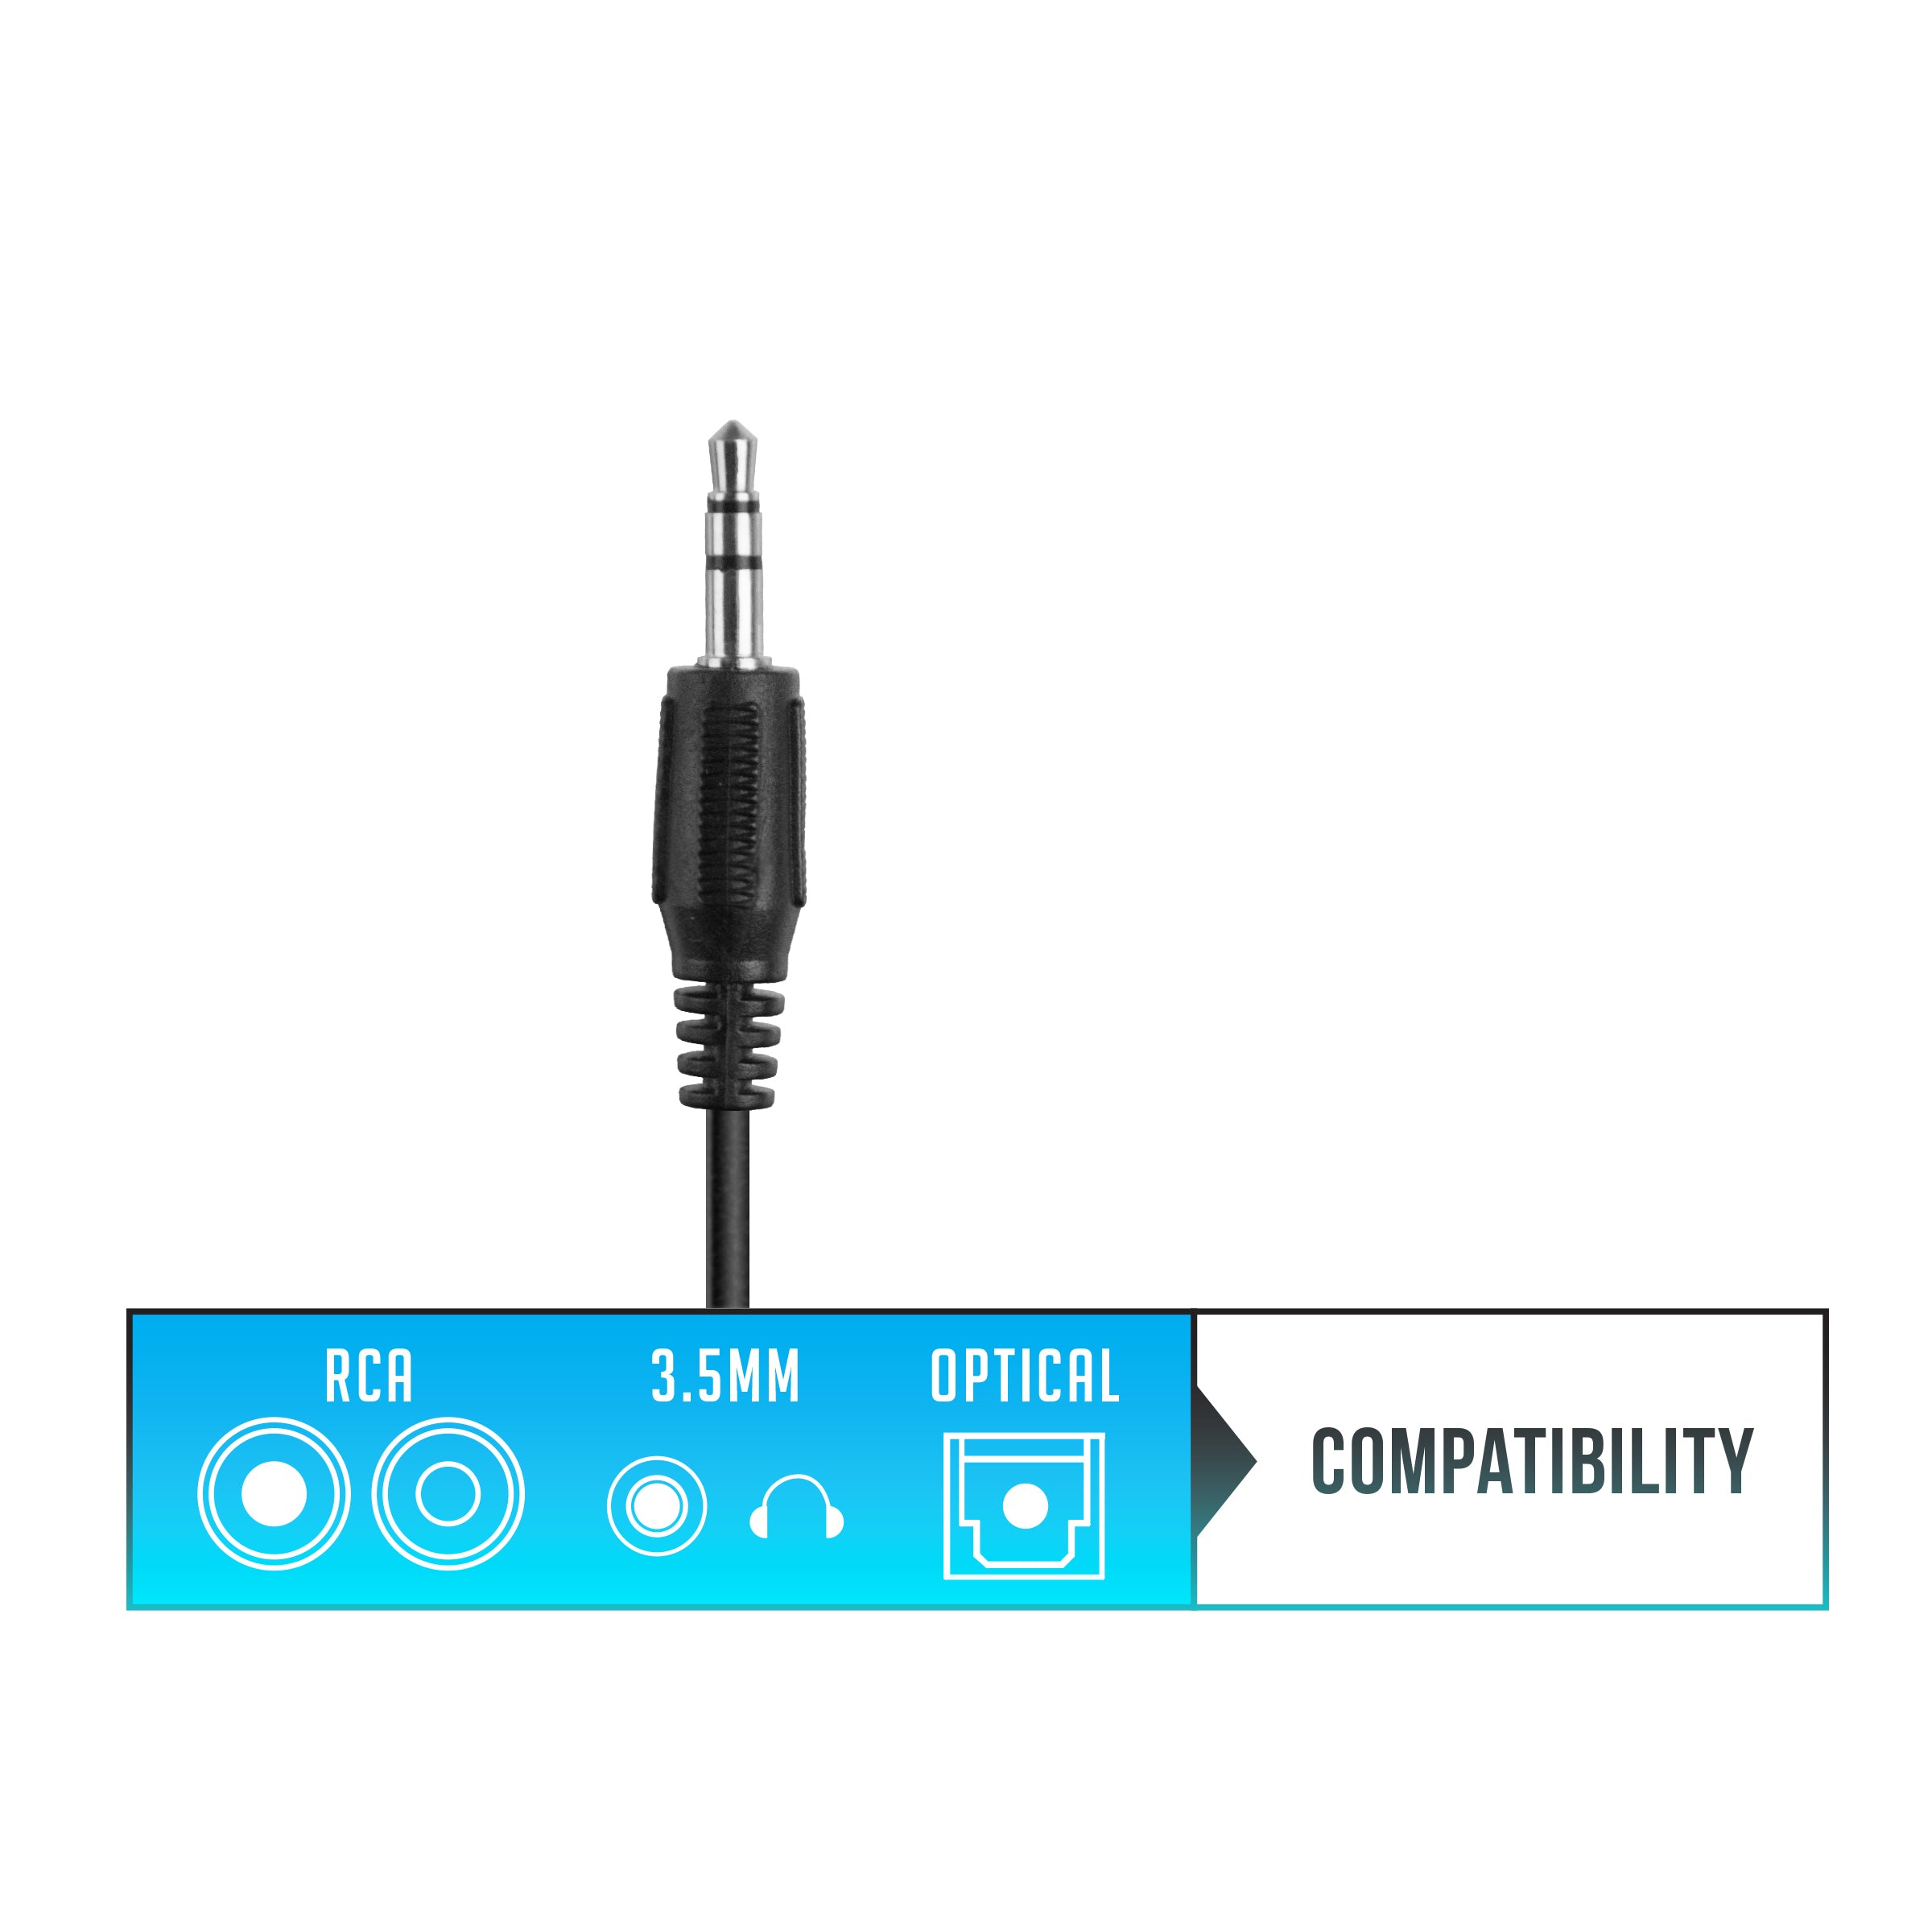 A 3.5mm audio jack cable is depicted above an icon bar representing compatibility with rca, 3.5mm, and optical audio connections.